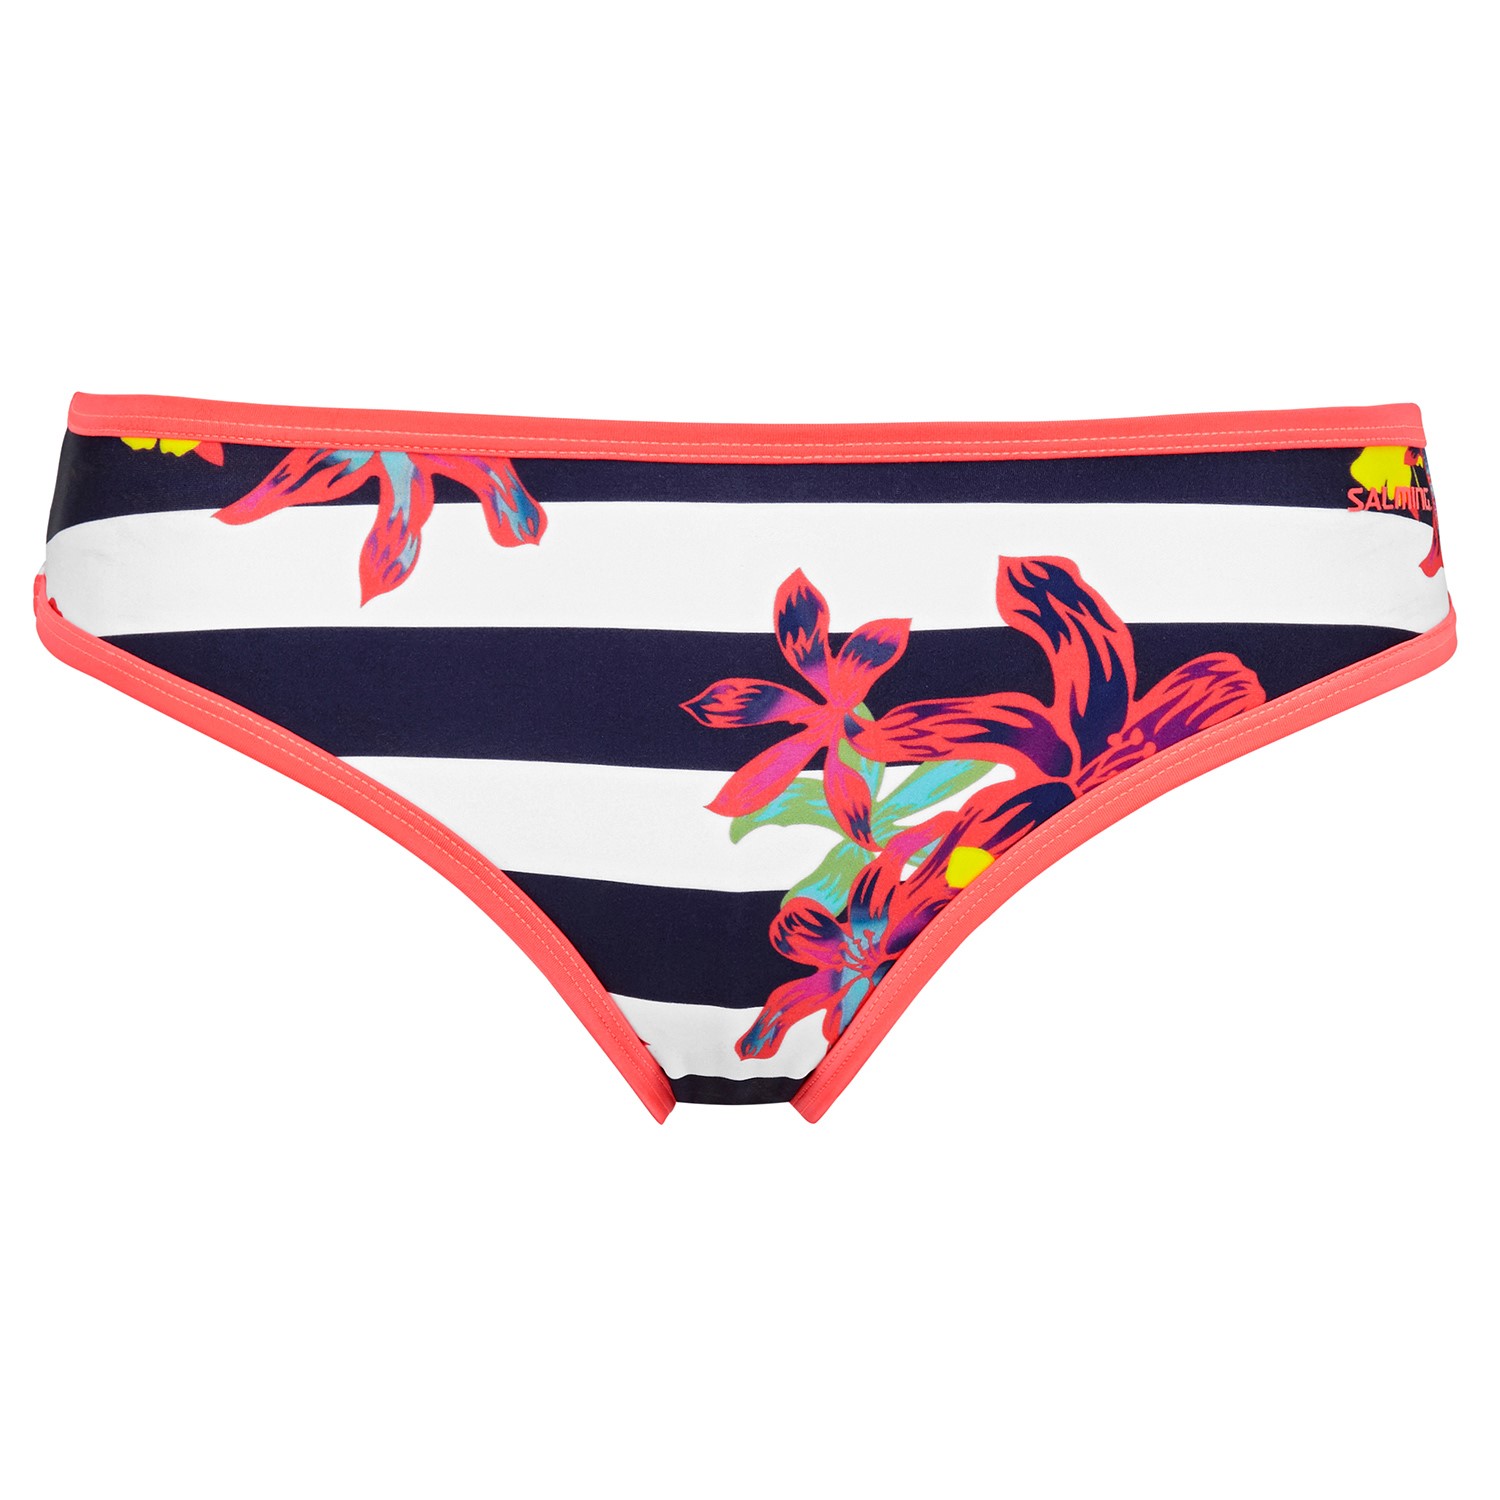 Salming Tropical Brief